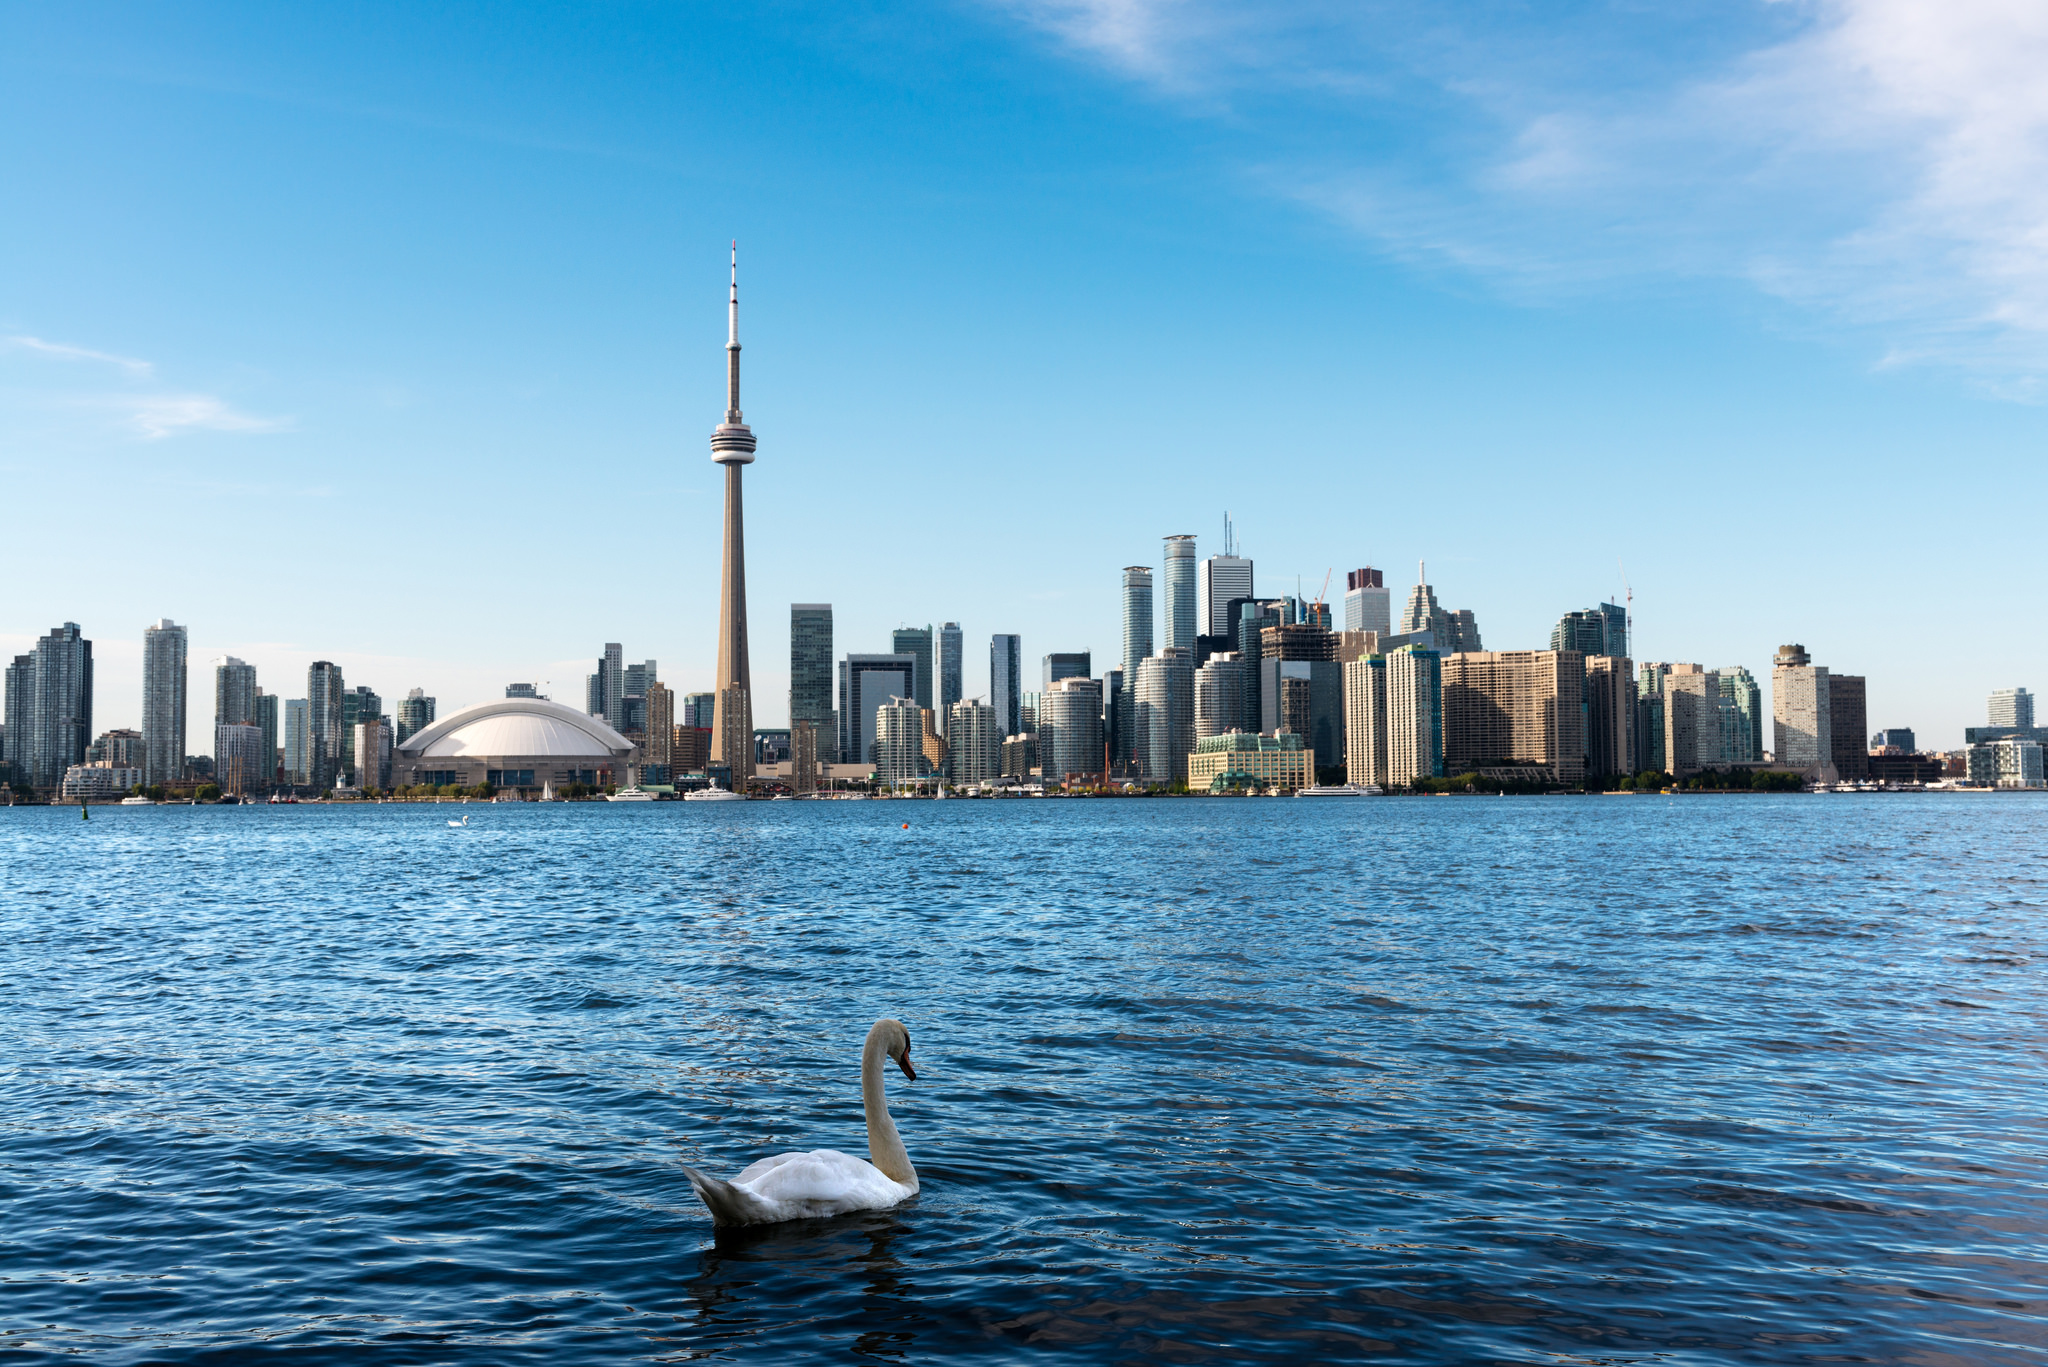 Photo of Toronto Waterfront and Lake Ontario. There is also a beautiful swan on the lake.